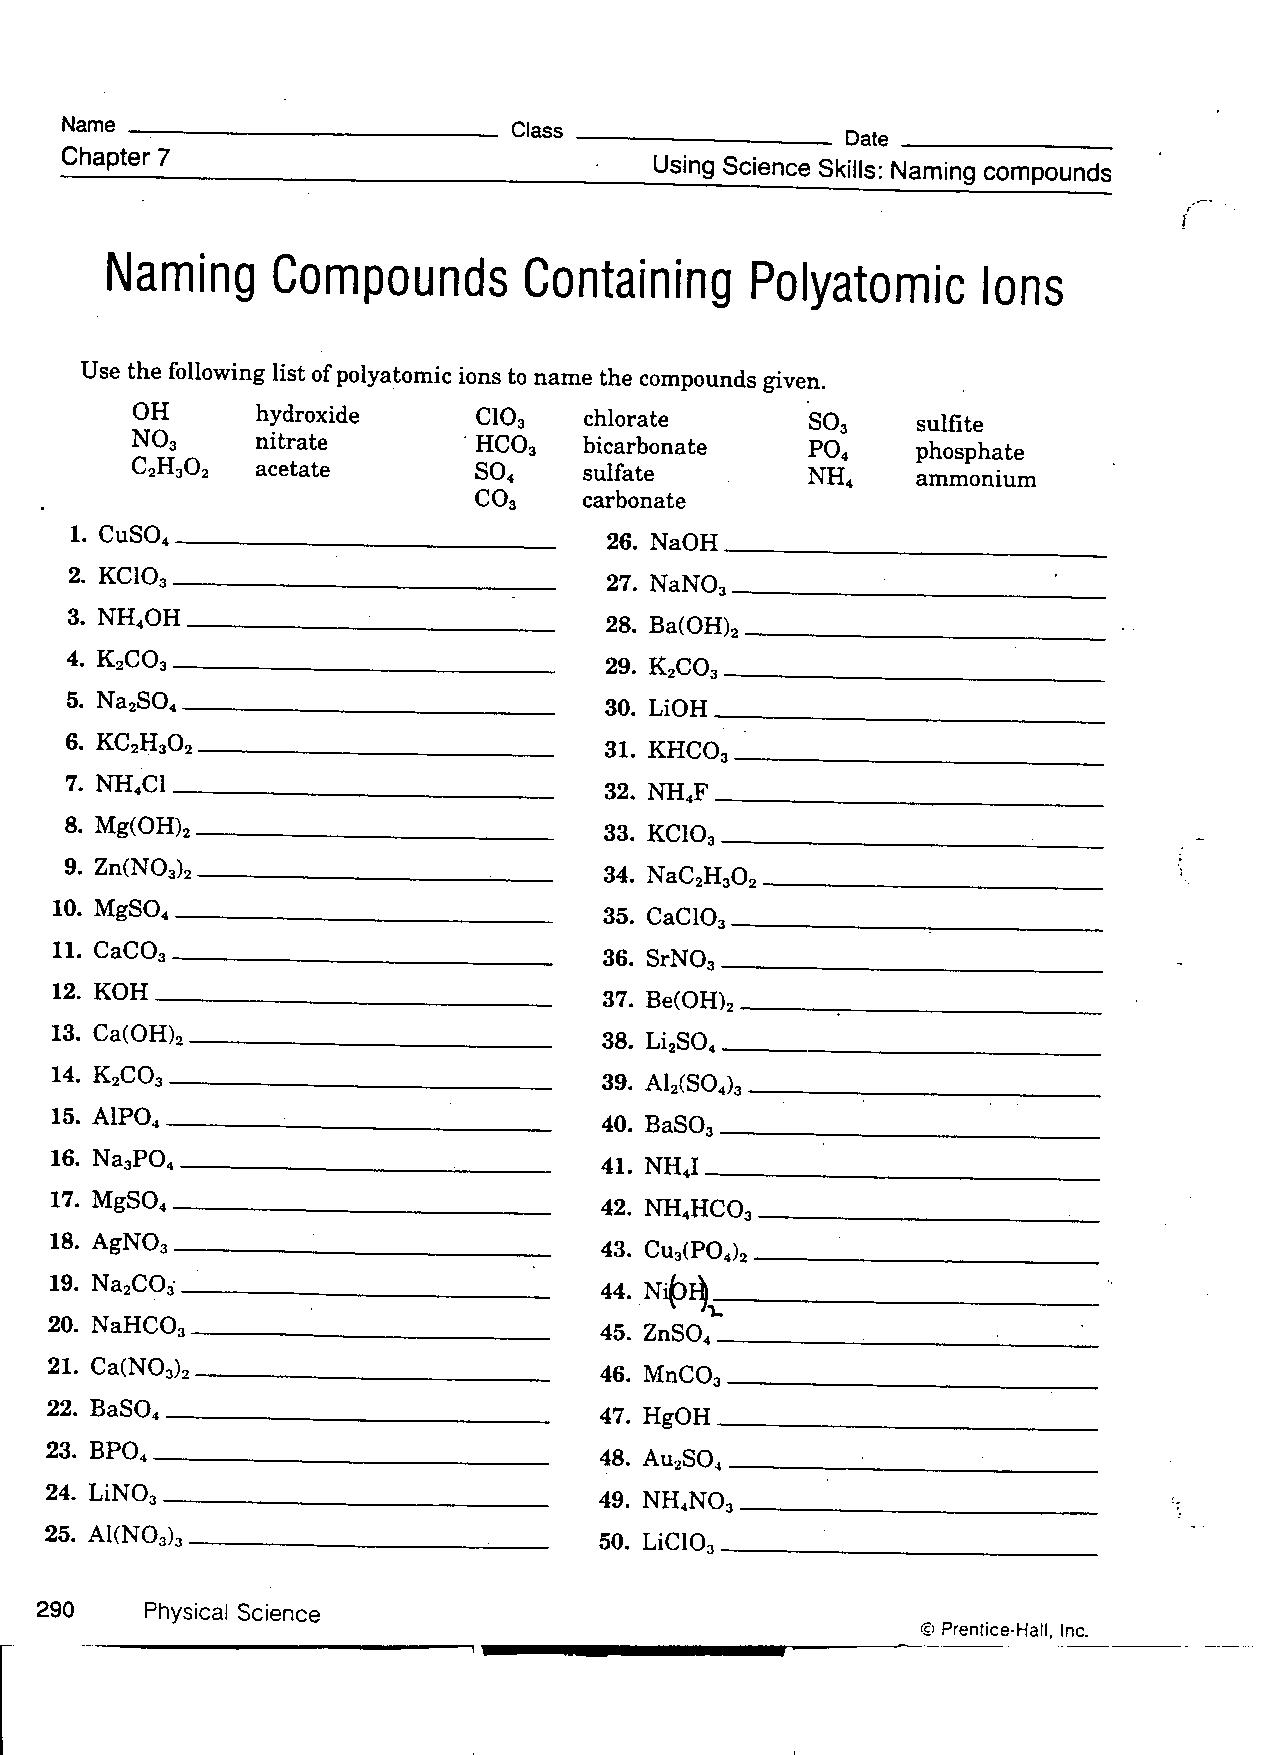 Polyatomic Ions - Harrisburg Chemistry Presents: With Regard To Polyatomic Ions Worksheet Answers